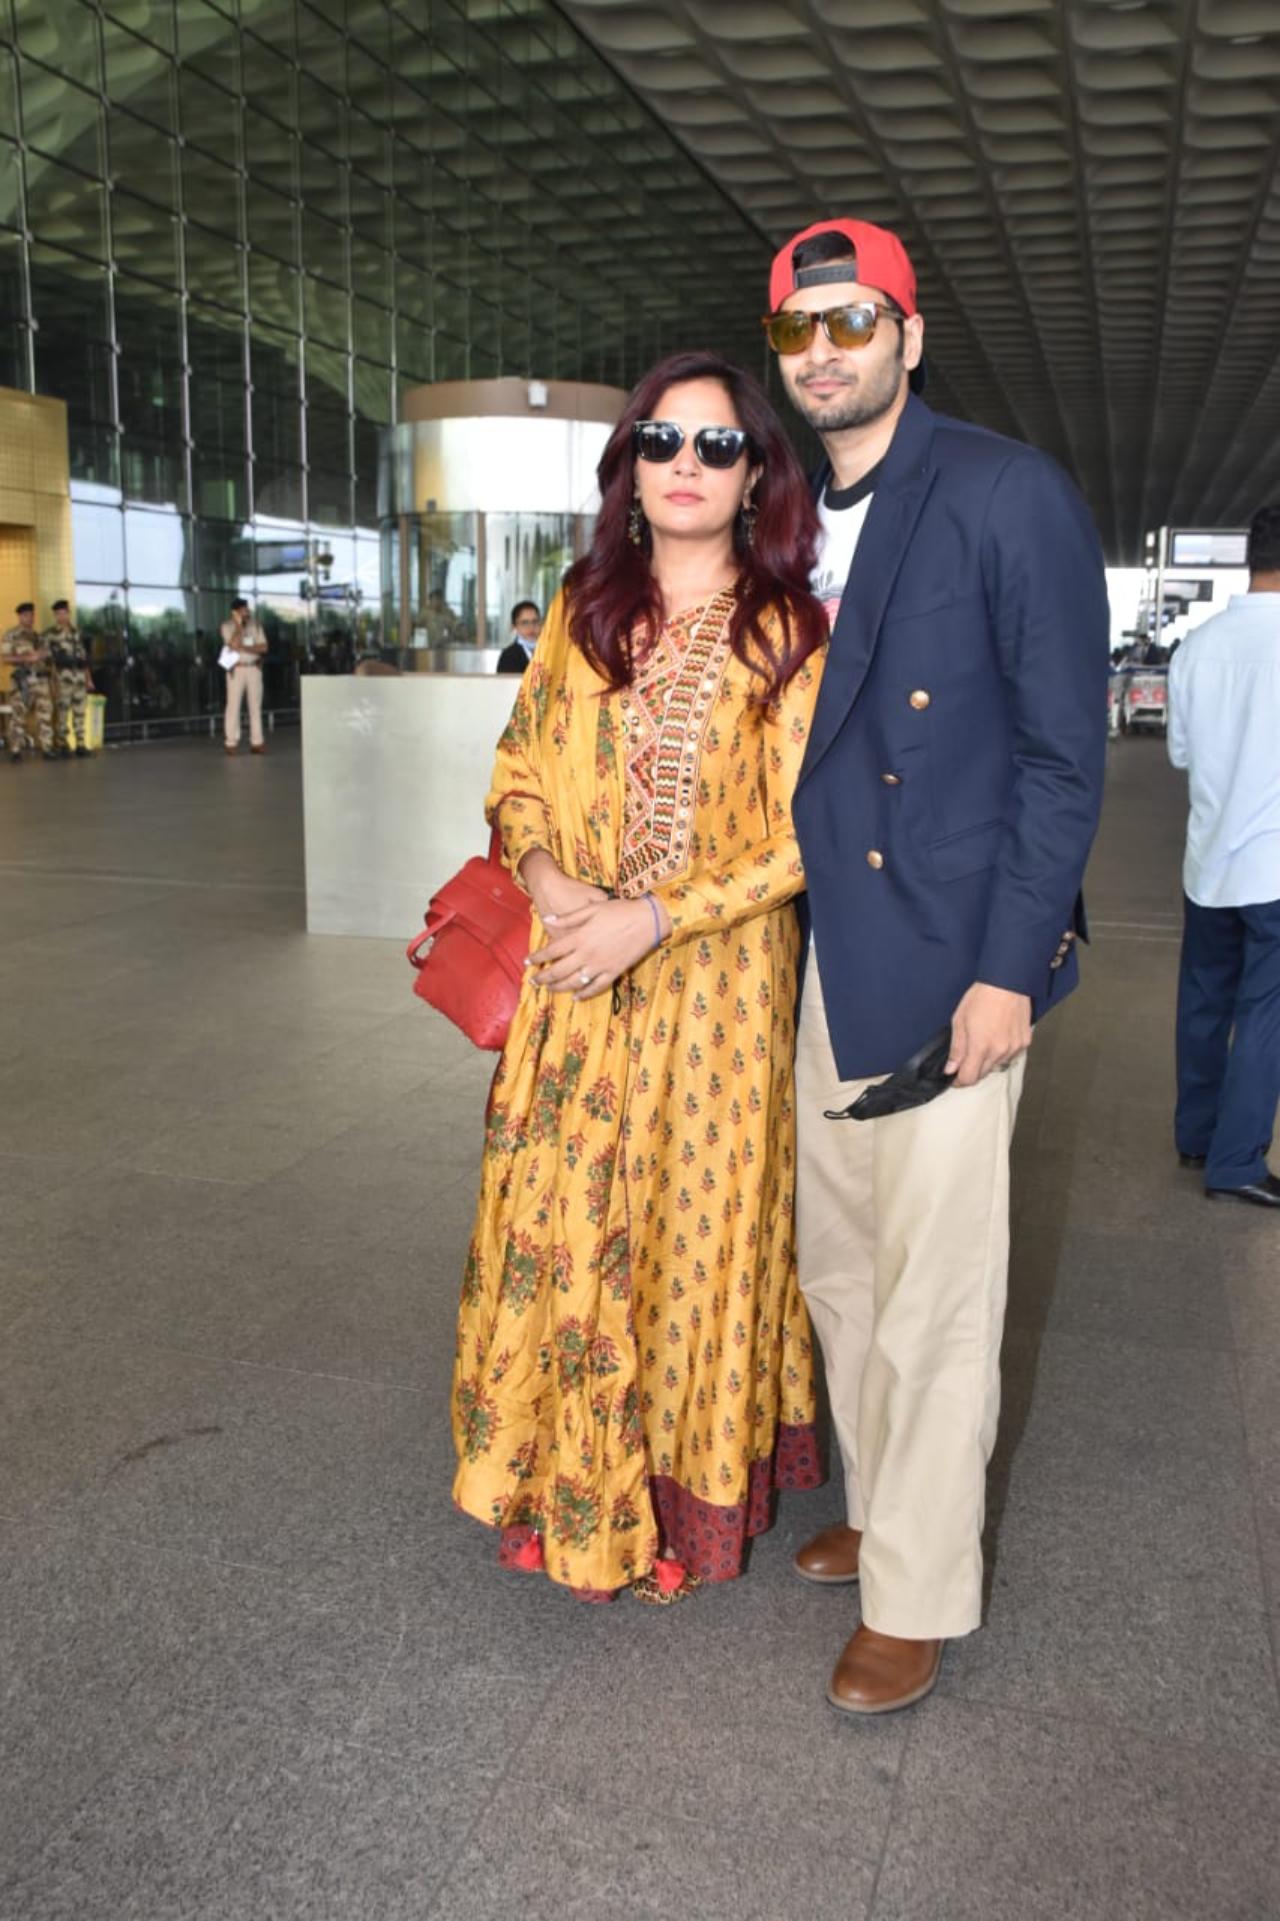 The couple is expected to have wedding celebrations and functions in Delhi and Mumbai, with a special party also planned in Delhi post the wedding in mid-October at the iconic Delhi Gymkhana Club.